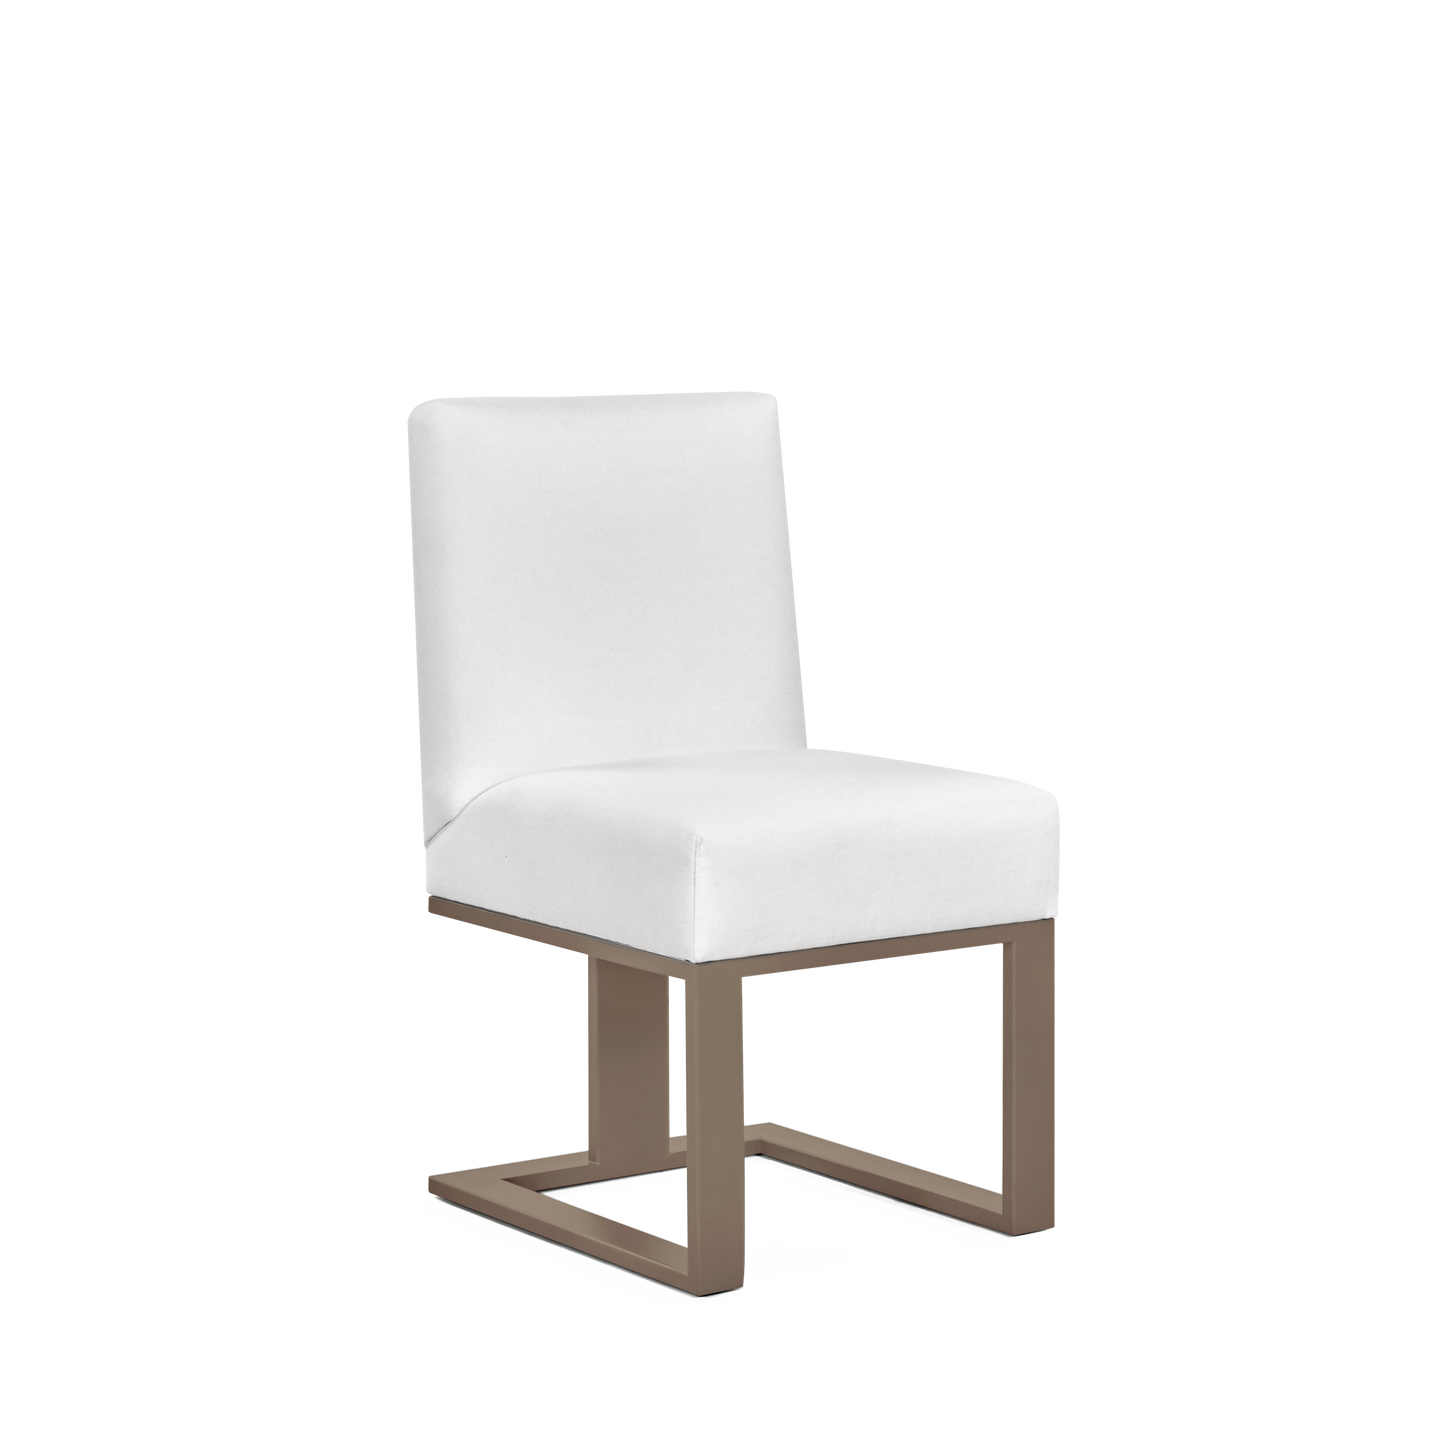 Len chair with linara white textile and champagne wood legs 